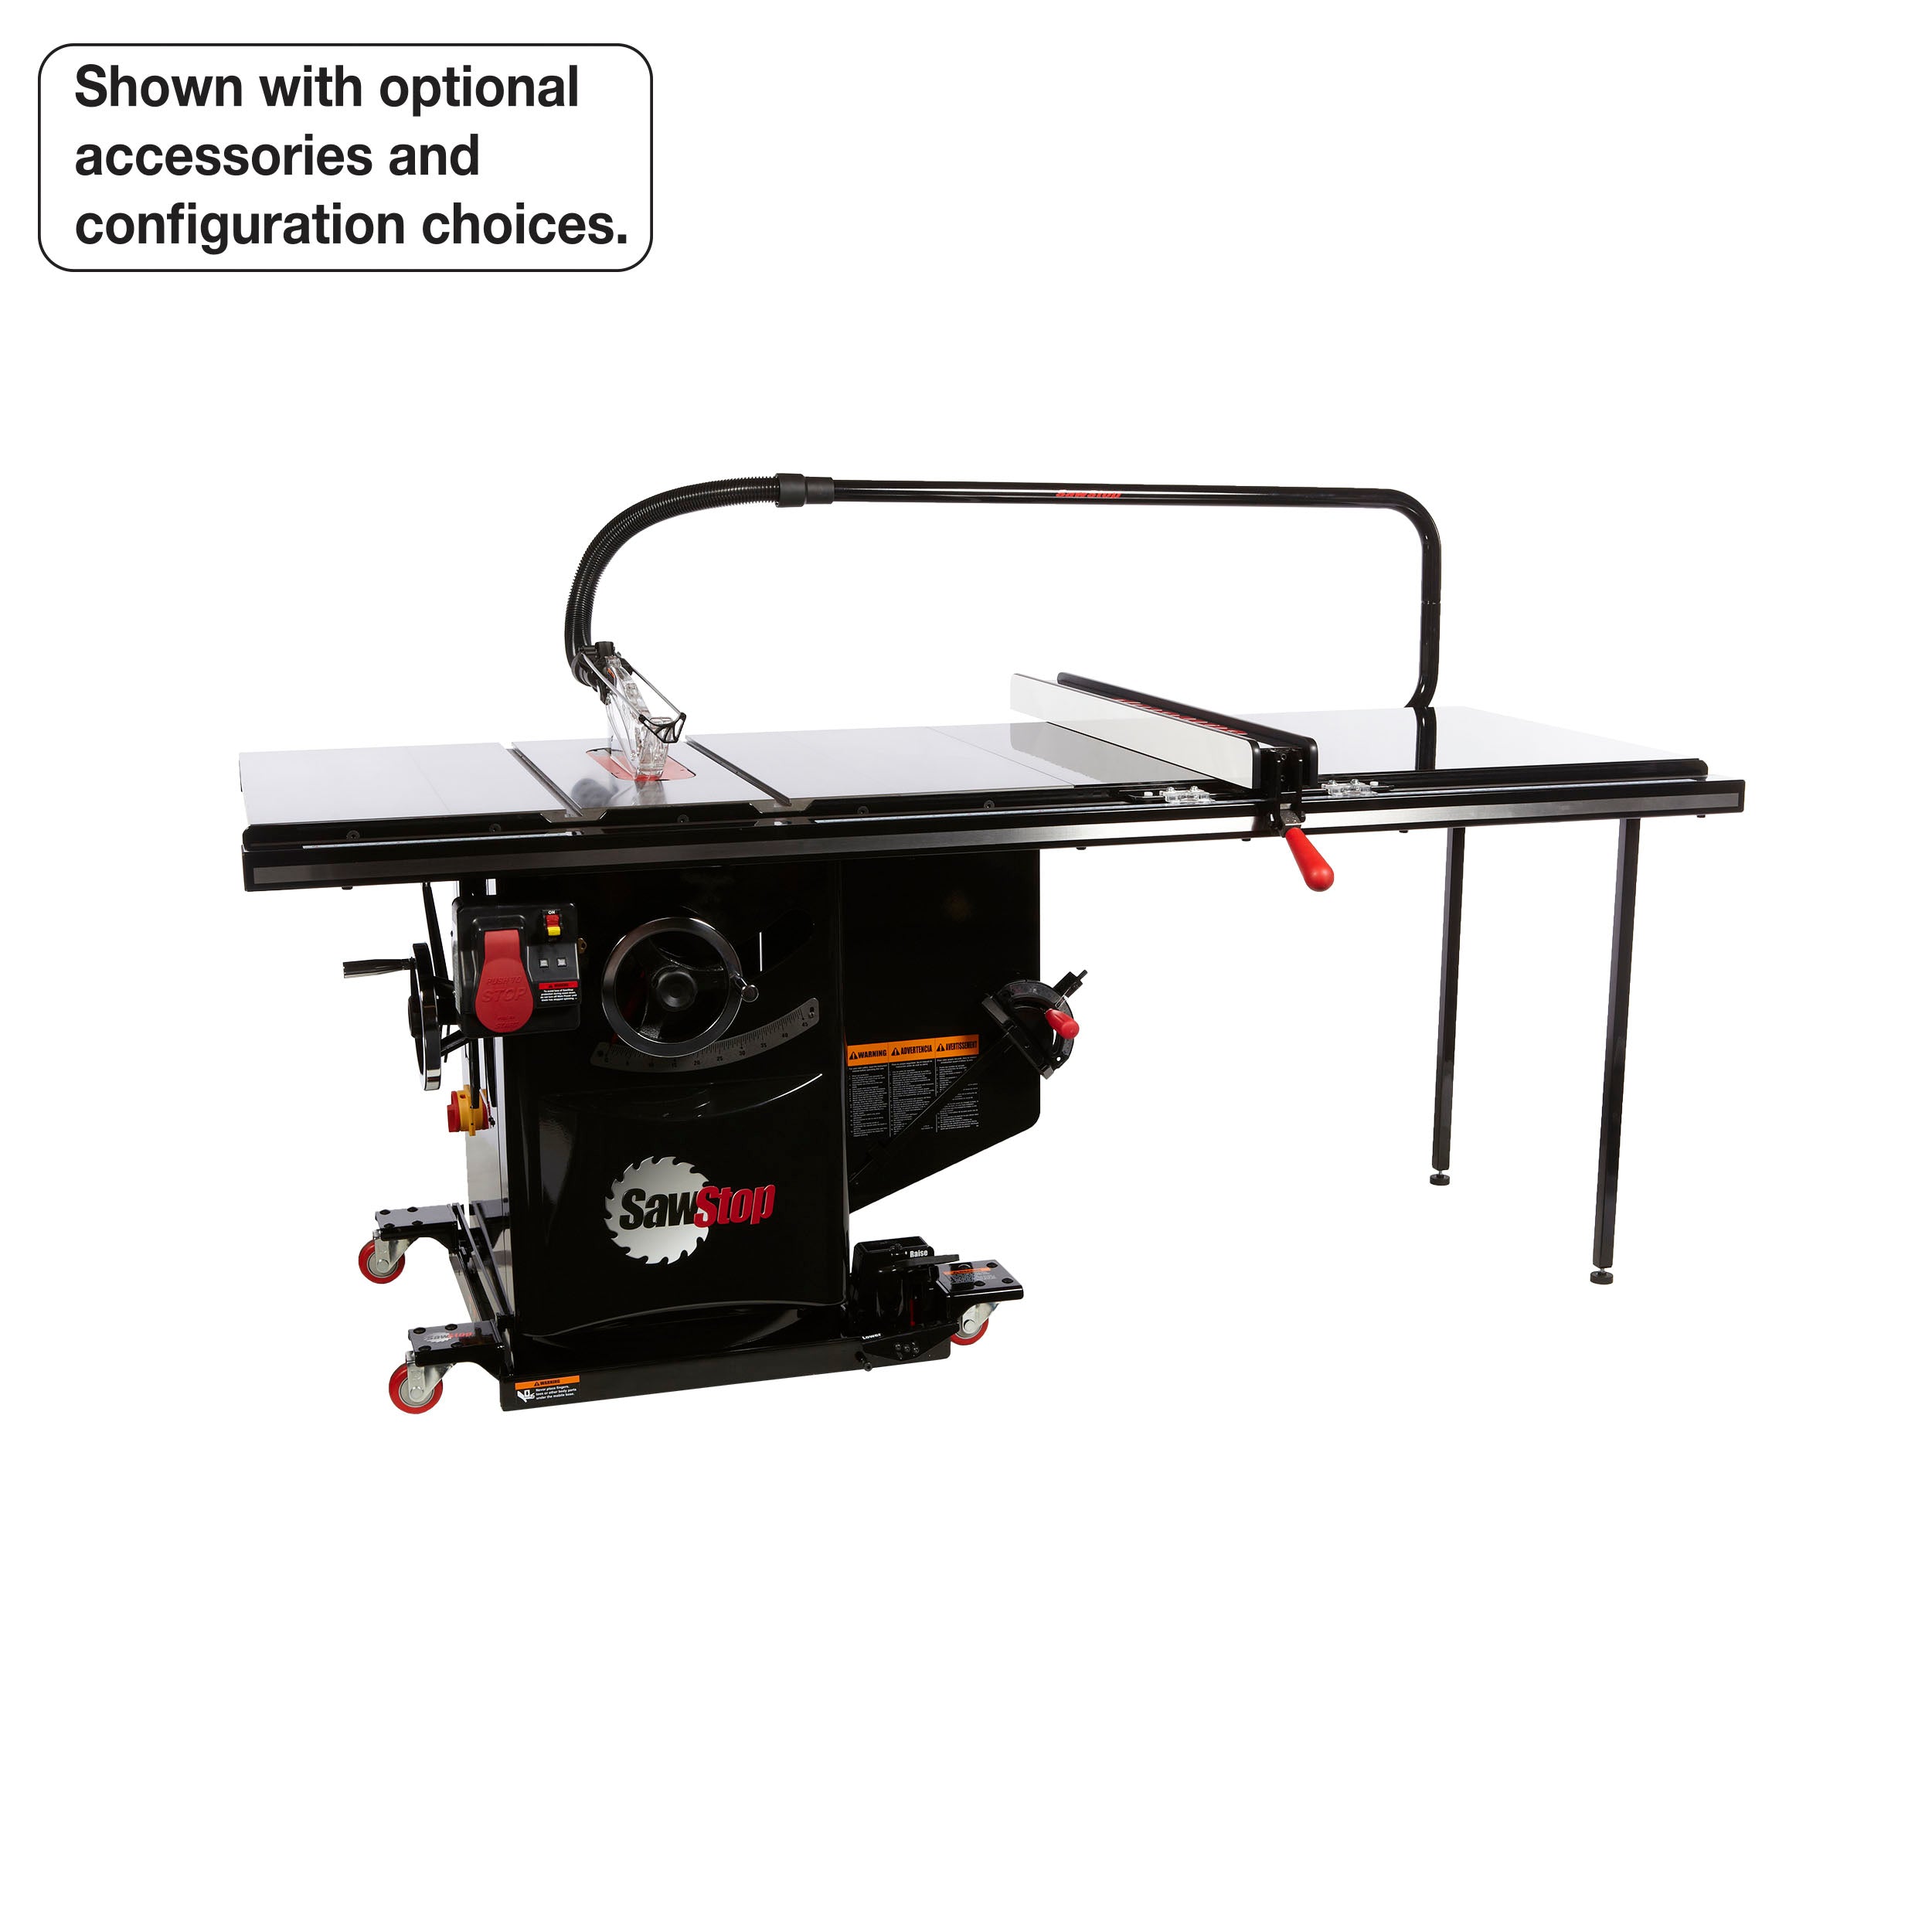 SawStop 7.5HP, 3ph, 480v Industrial Cabinet Saw w/ 52